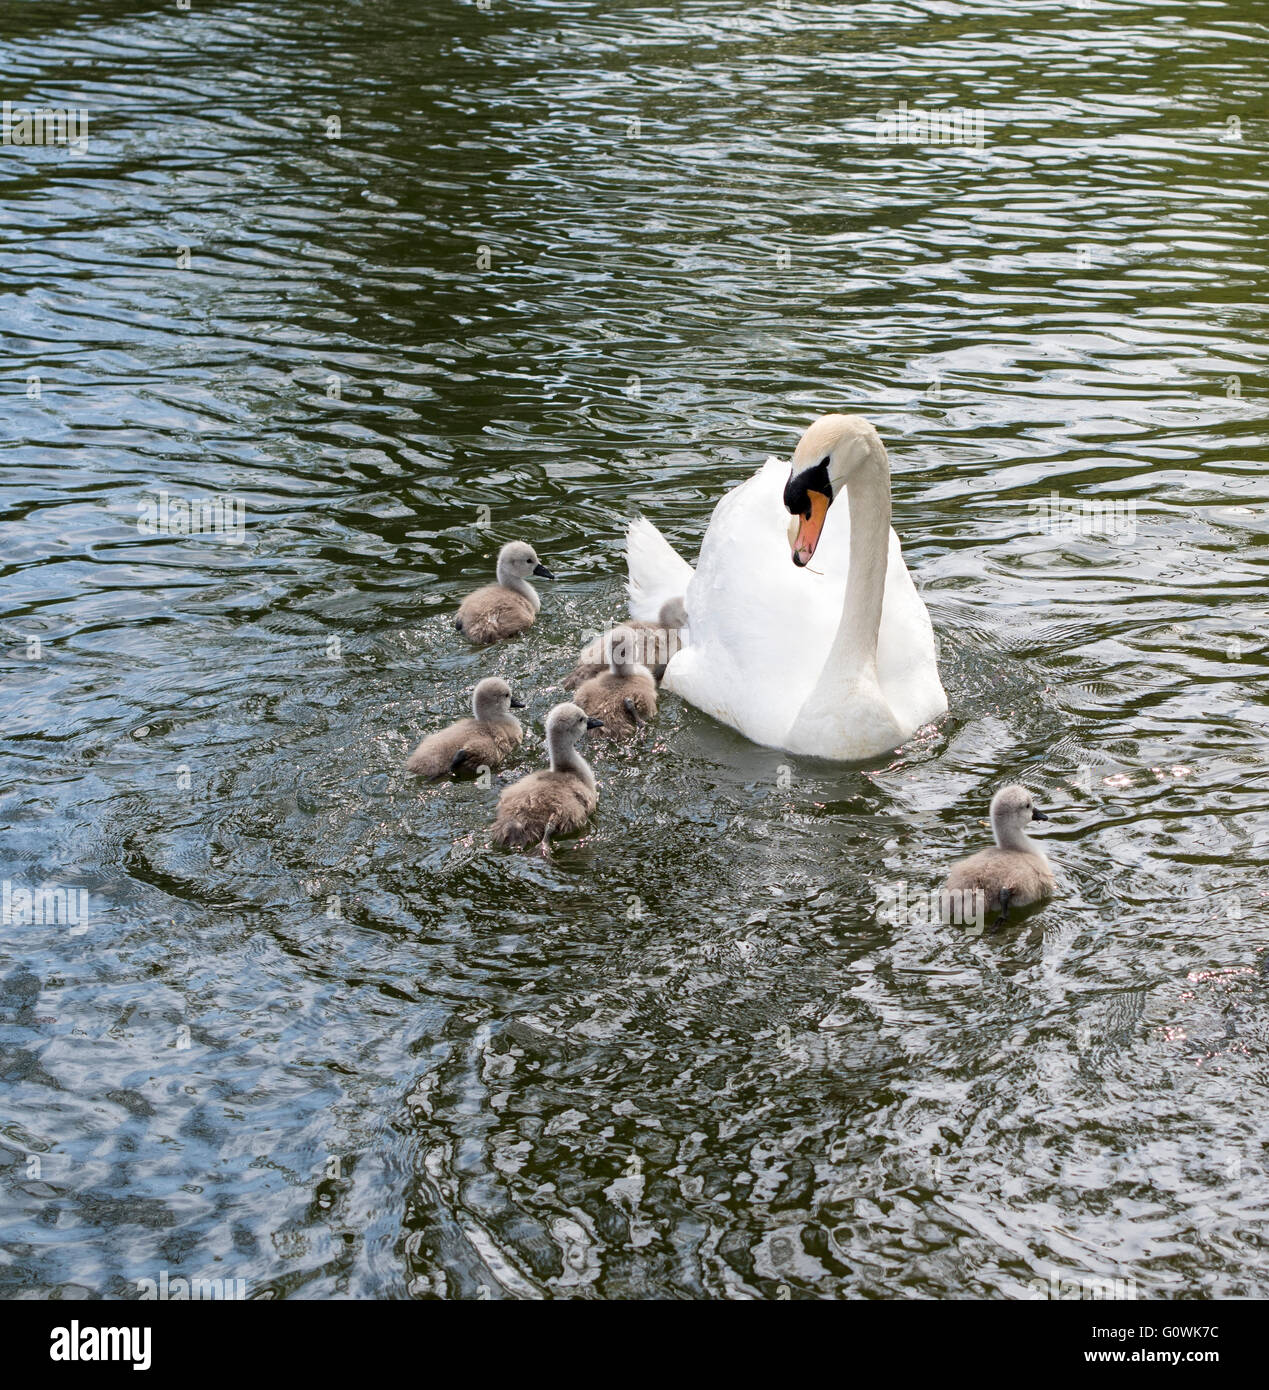 A swan swimming with its signets on a river Stock Photo